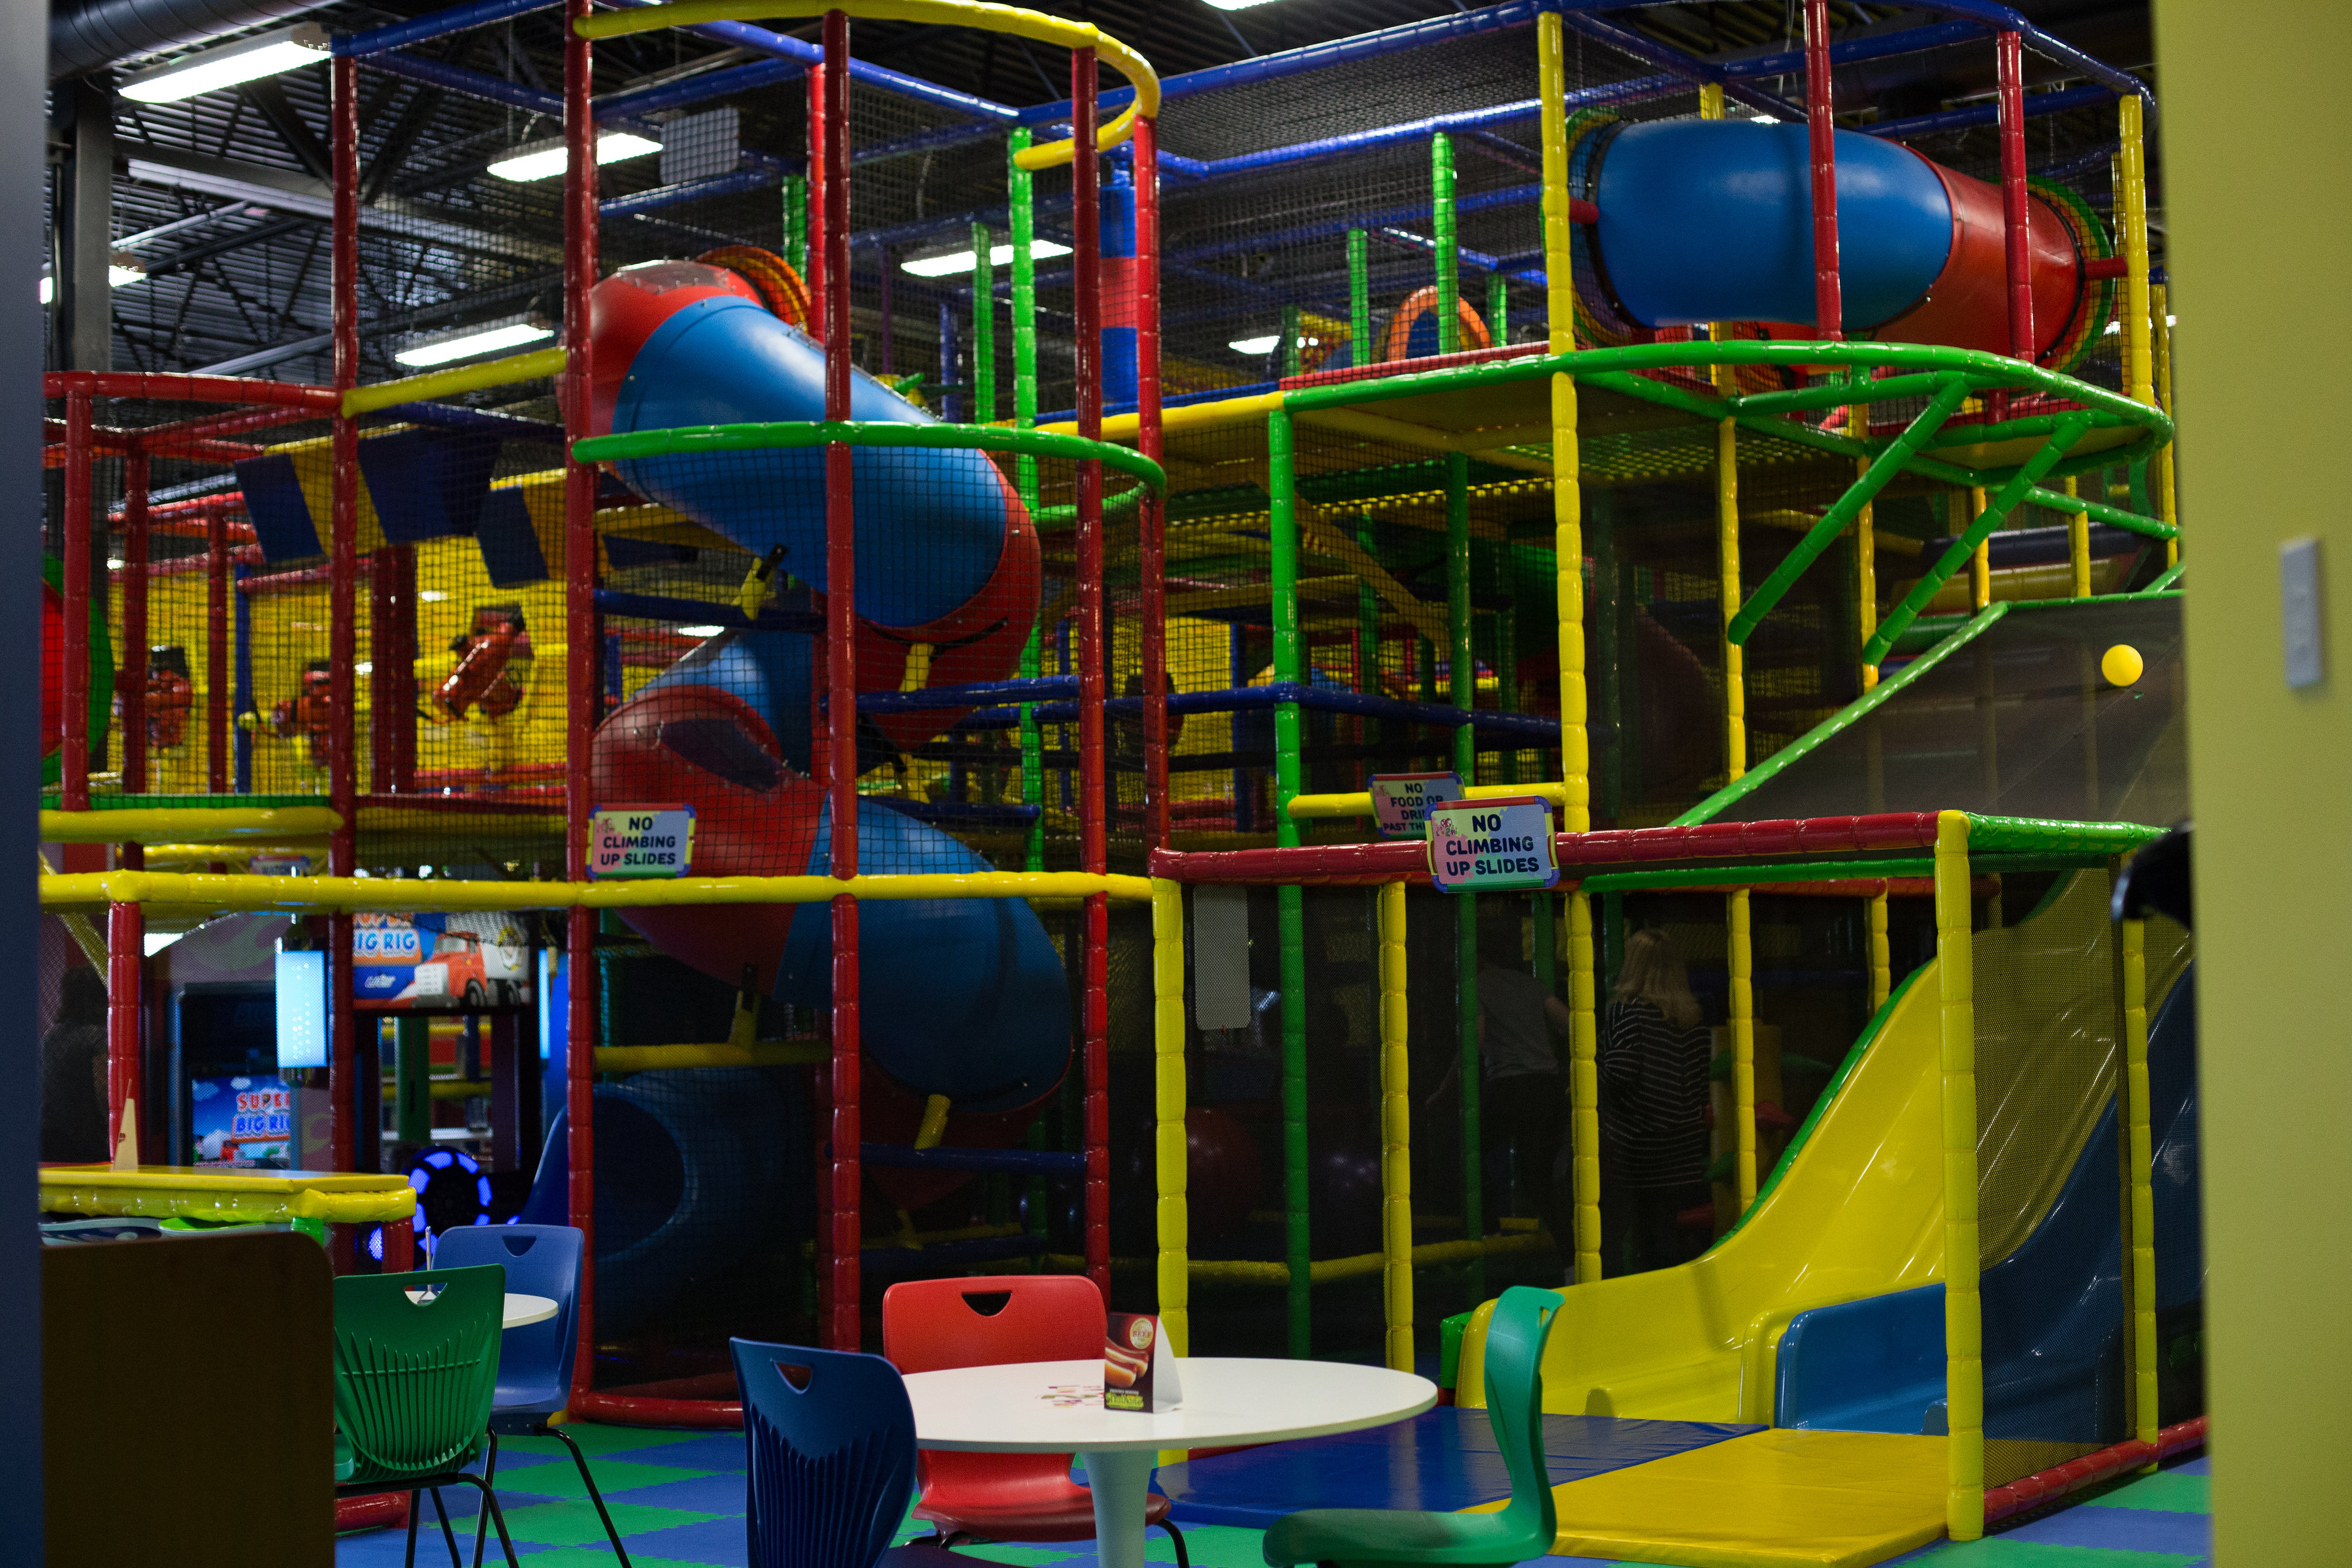 Indoor Playground, Luv2play, lake forest